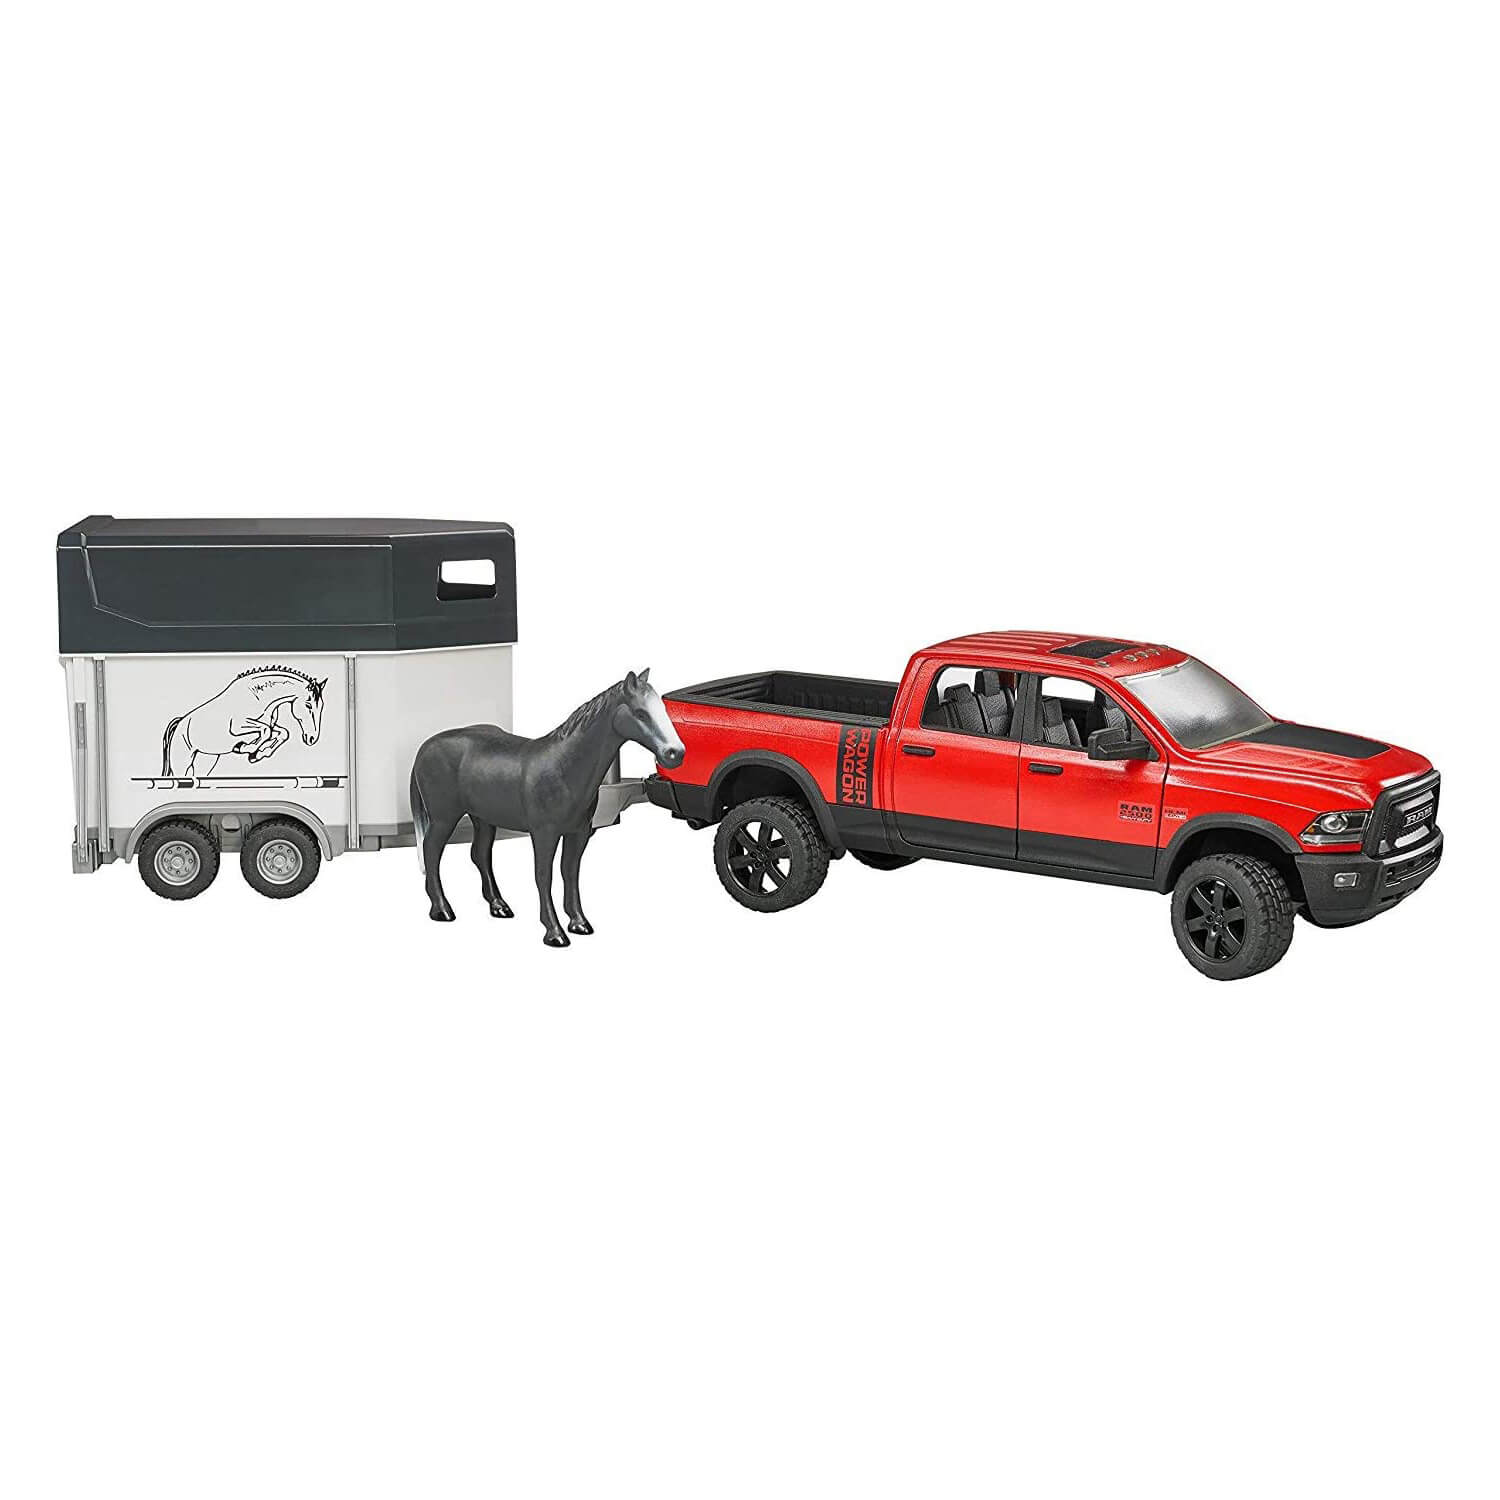 Bruder Pro Series RAM 2500 Pickup Truck w Horse Trailer and Horse 1:16 Scale Set